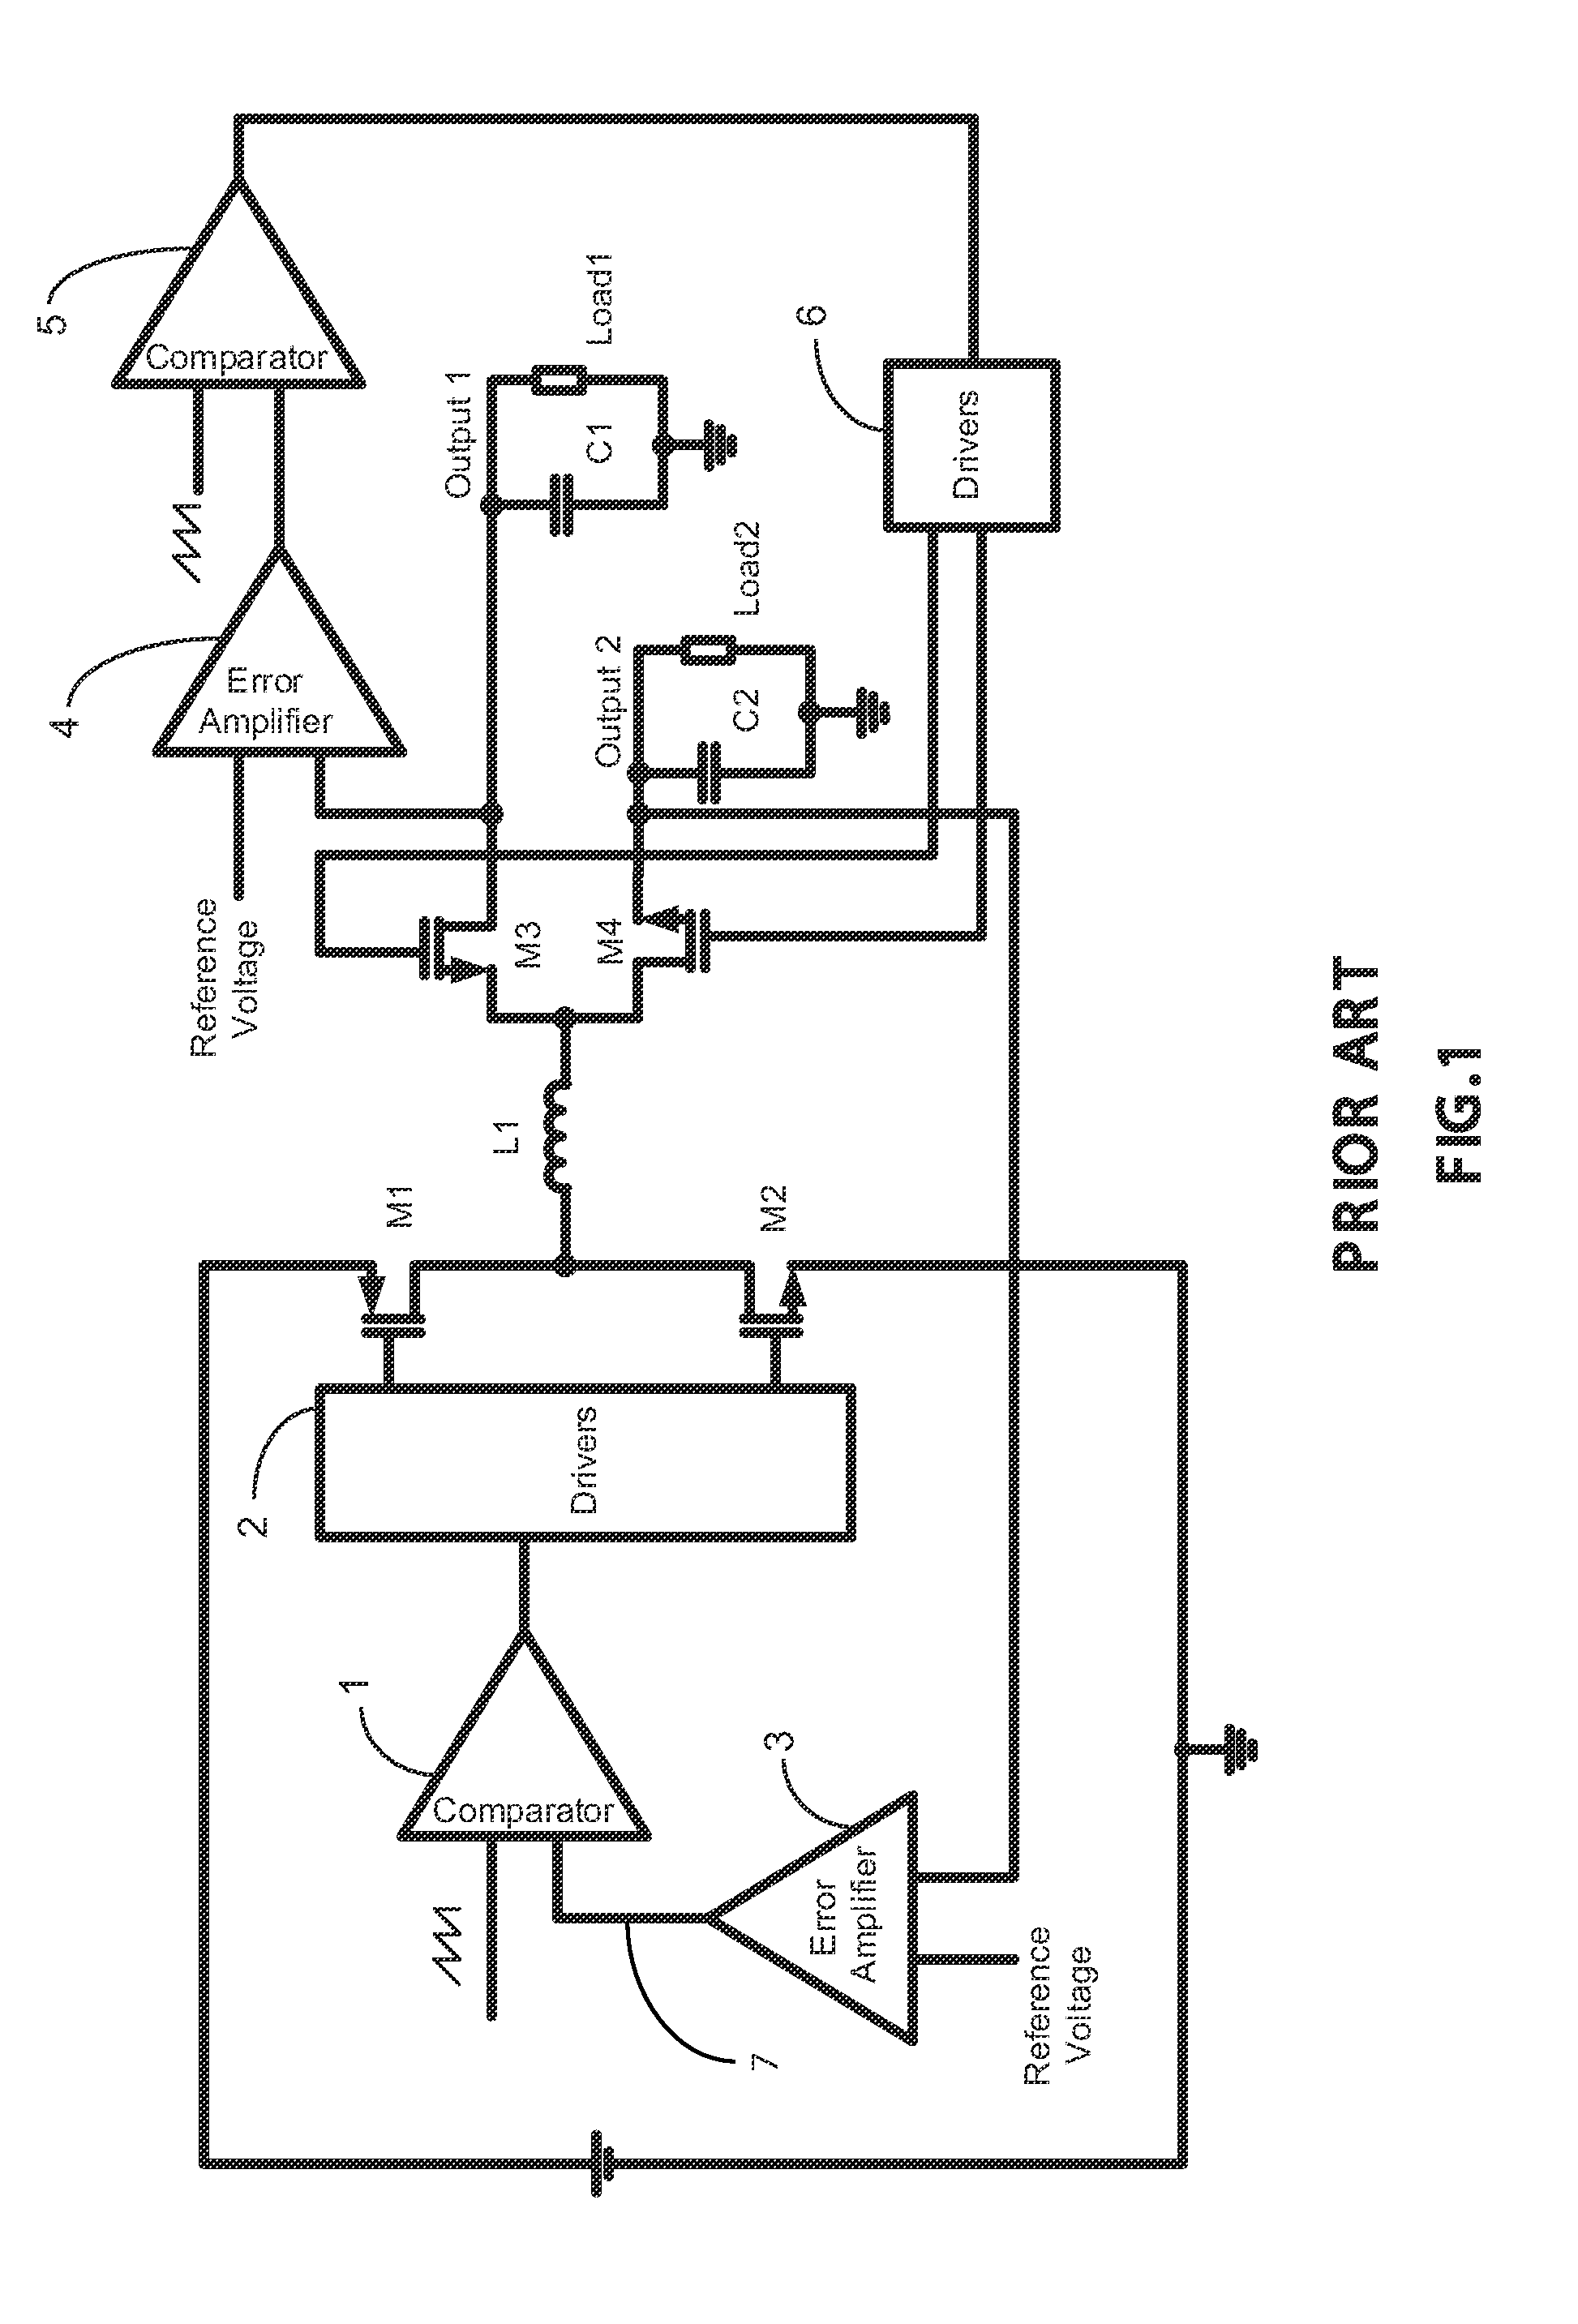 Single inductor multiple output power converter